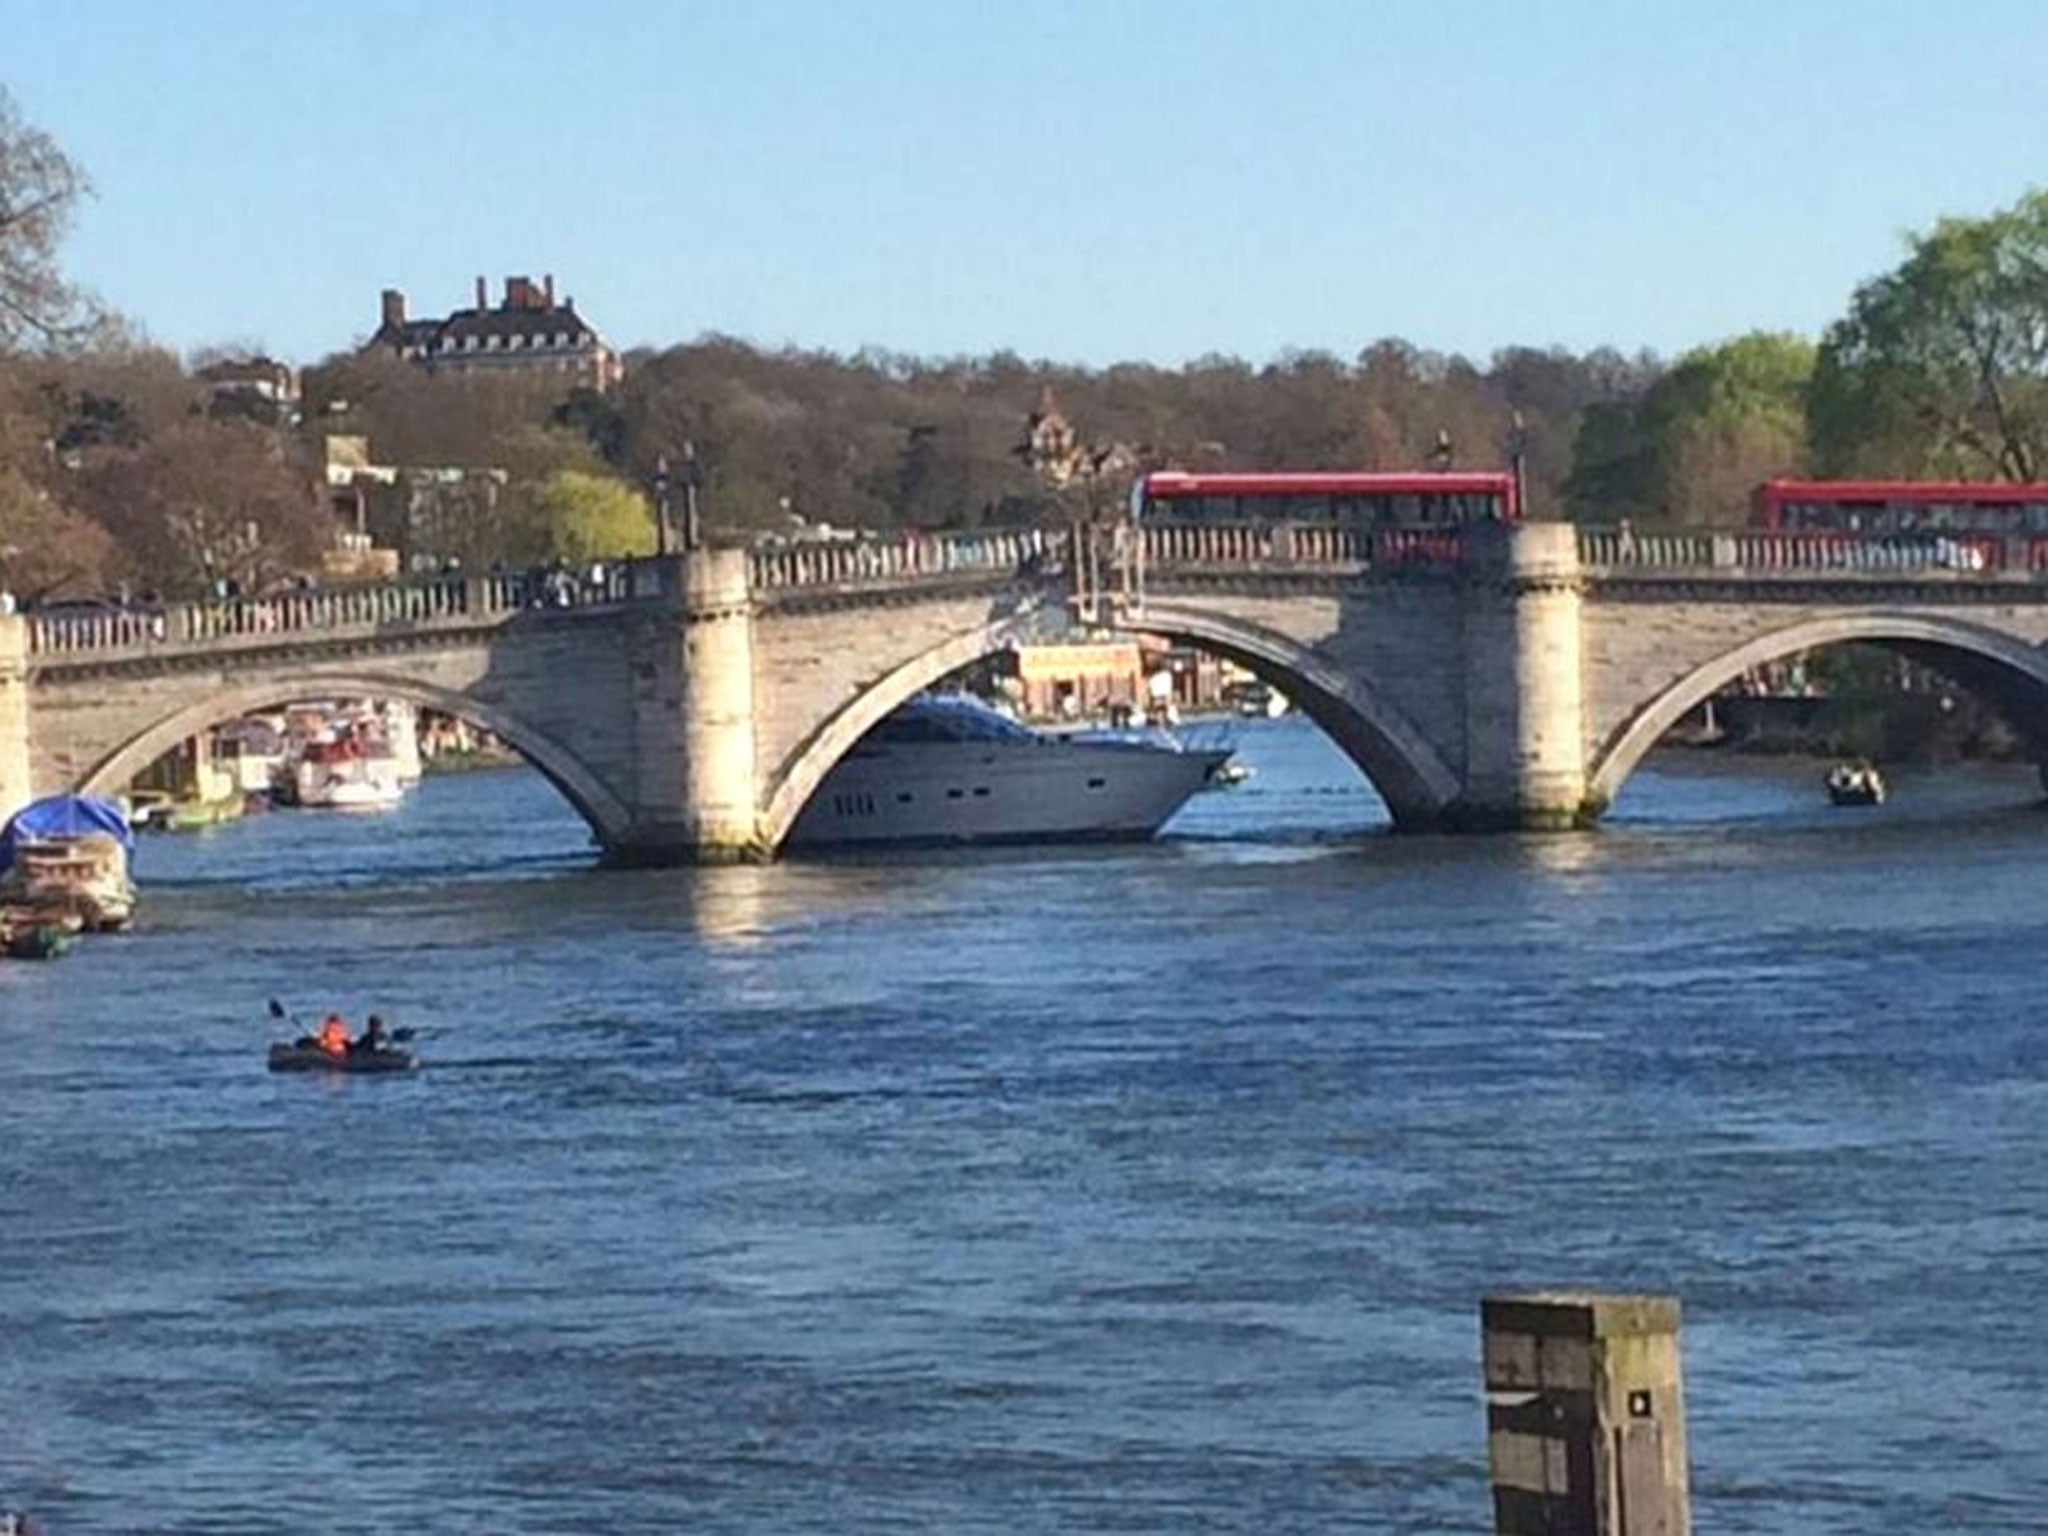 A yacht which got stuck on the River Thames under Richmond bridge in London.